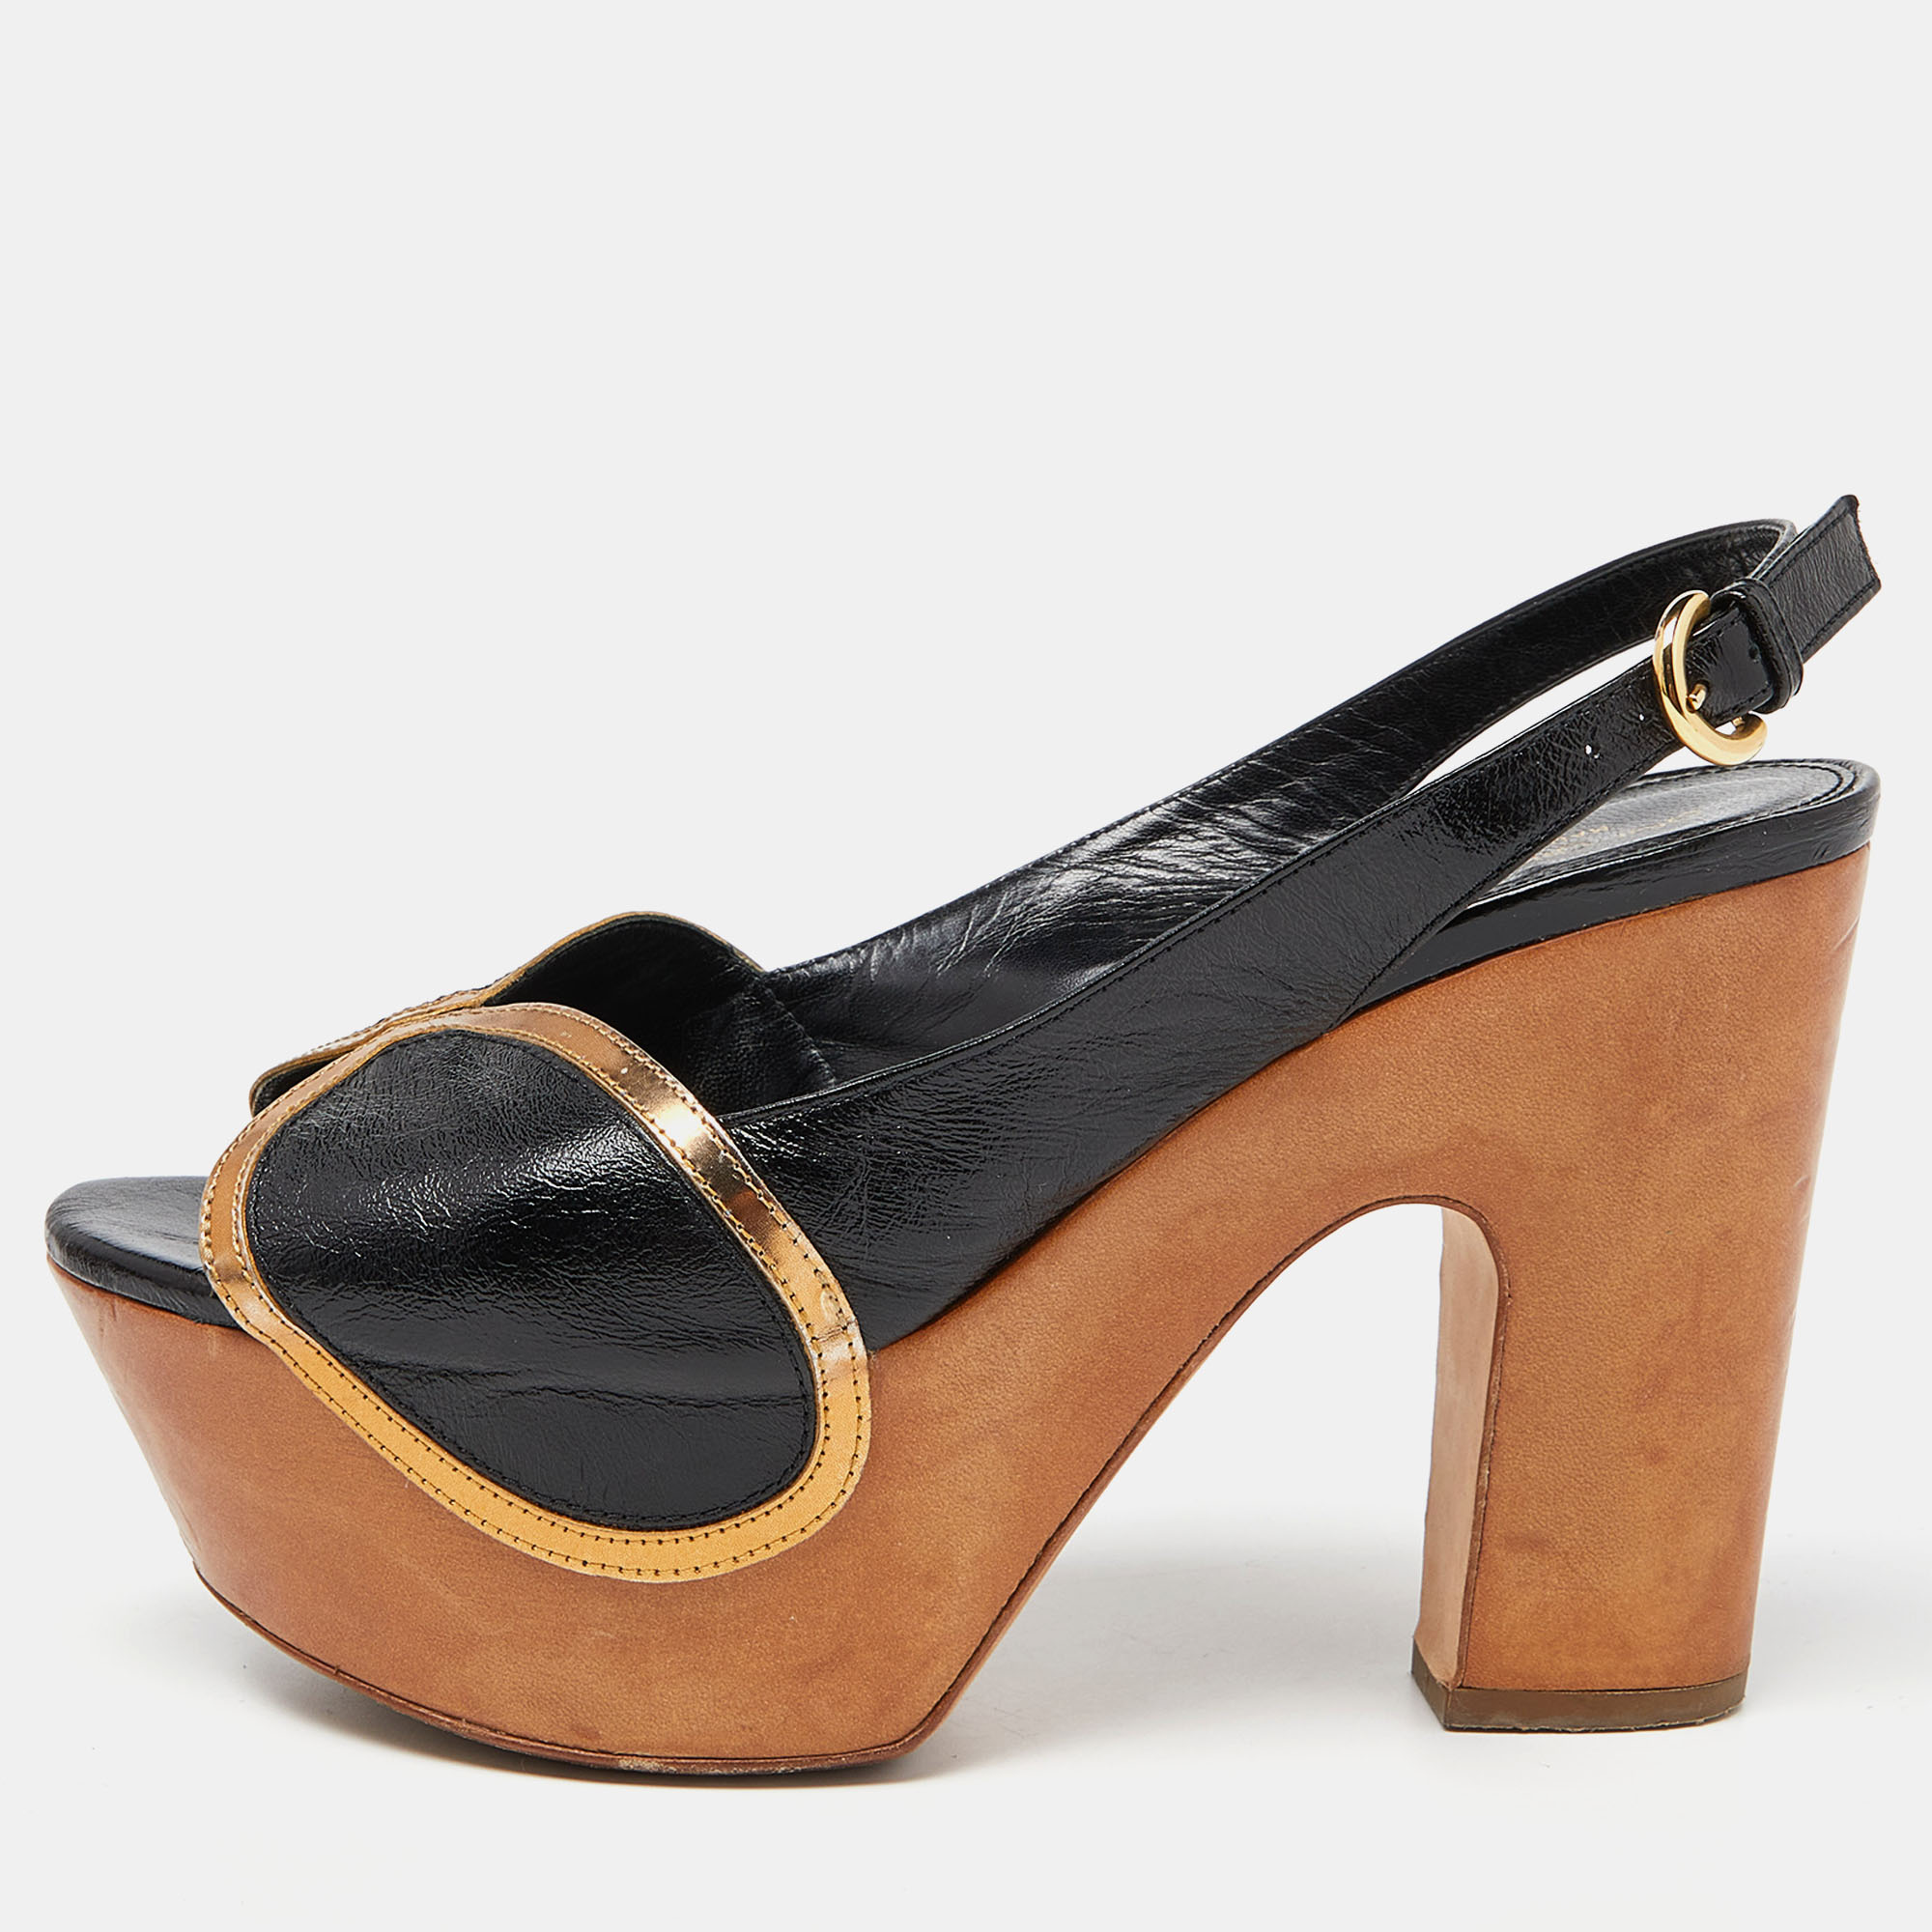 Pre-owned Sergio Rossi Black/metallic Brown Leather Wooden Platform Open Toe Slingback Pumps Size 37.5